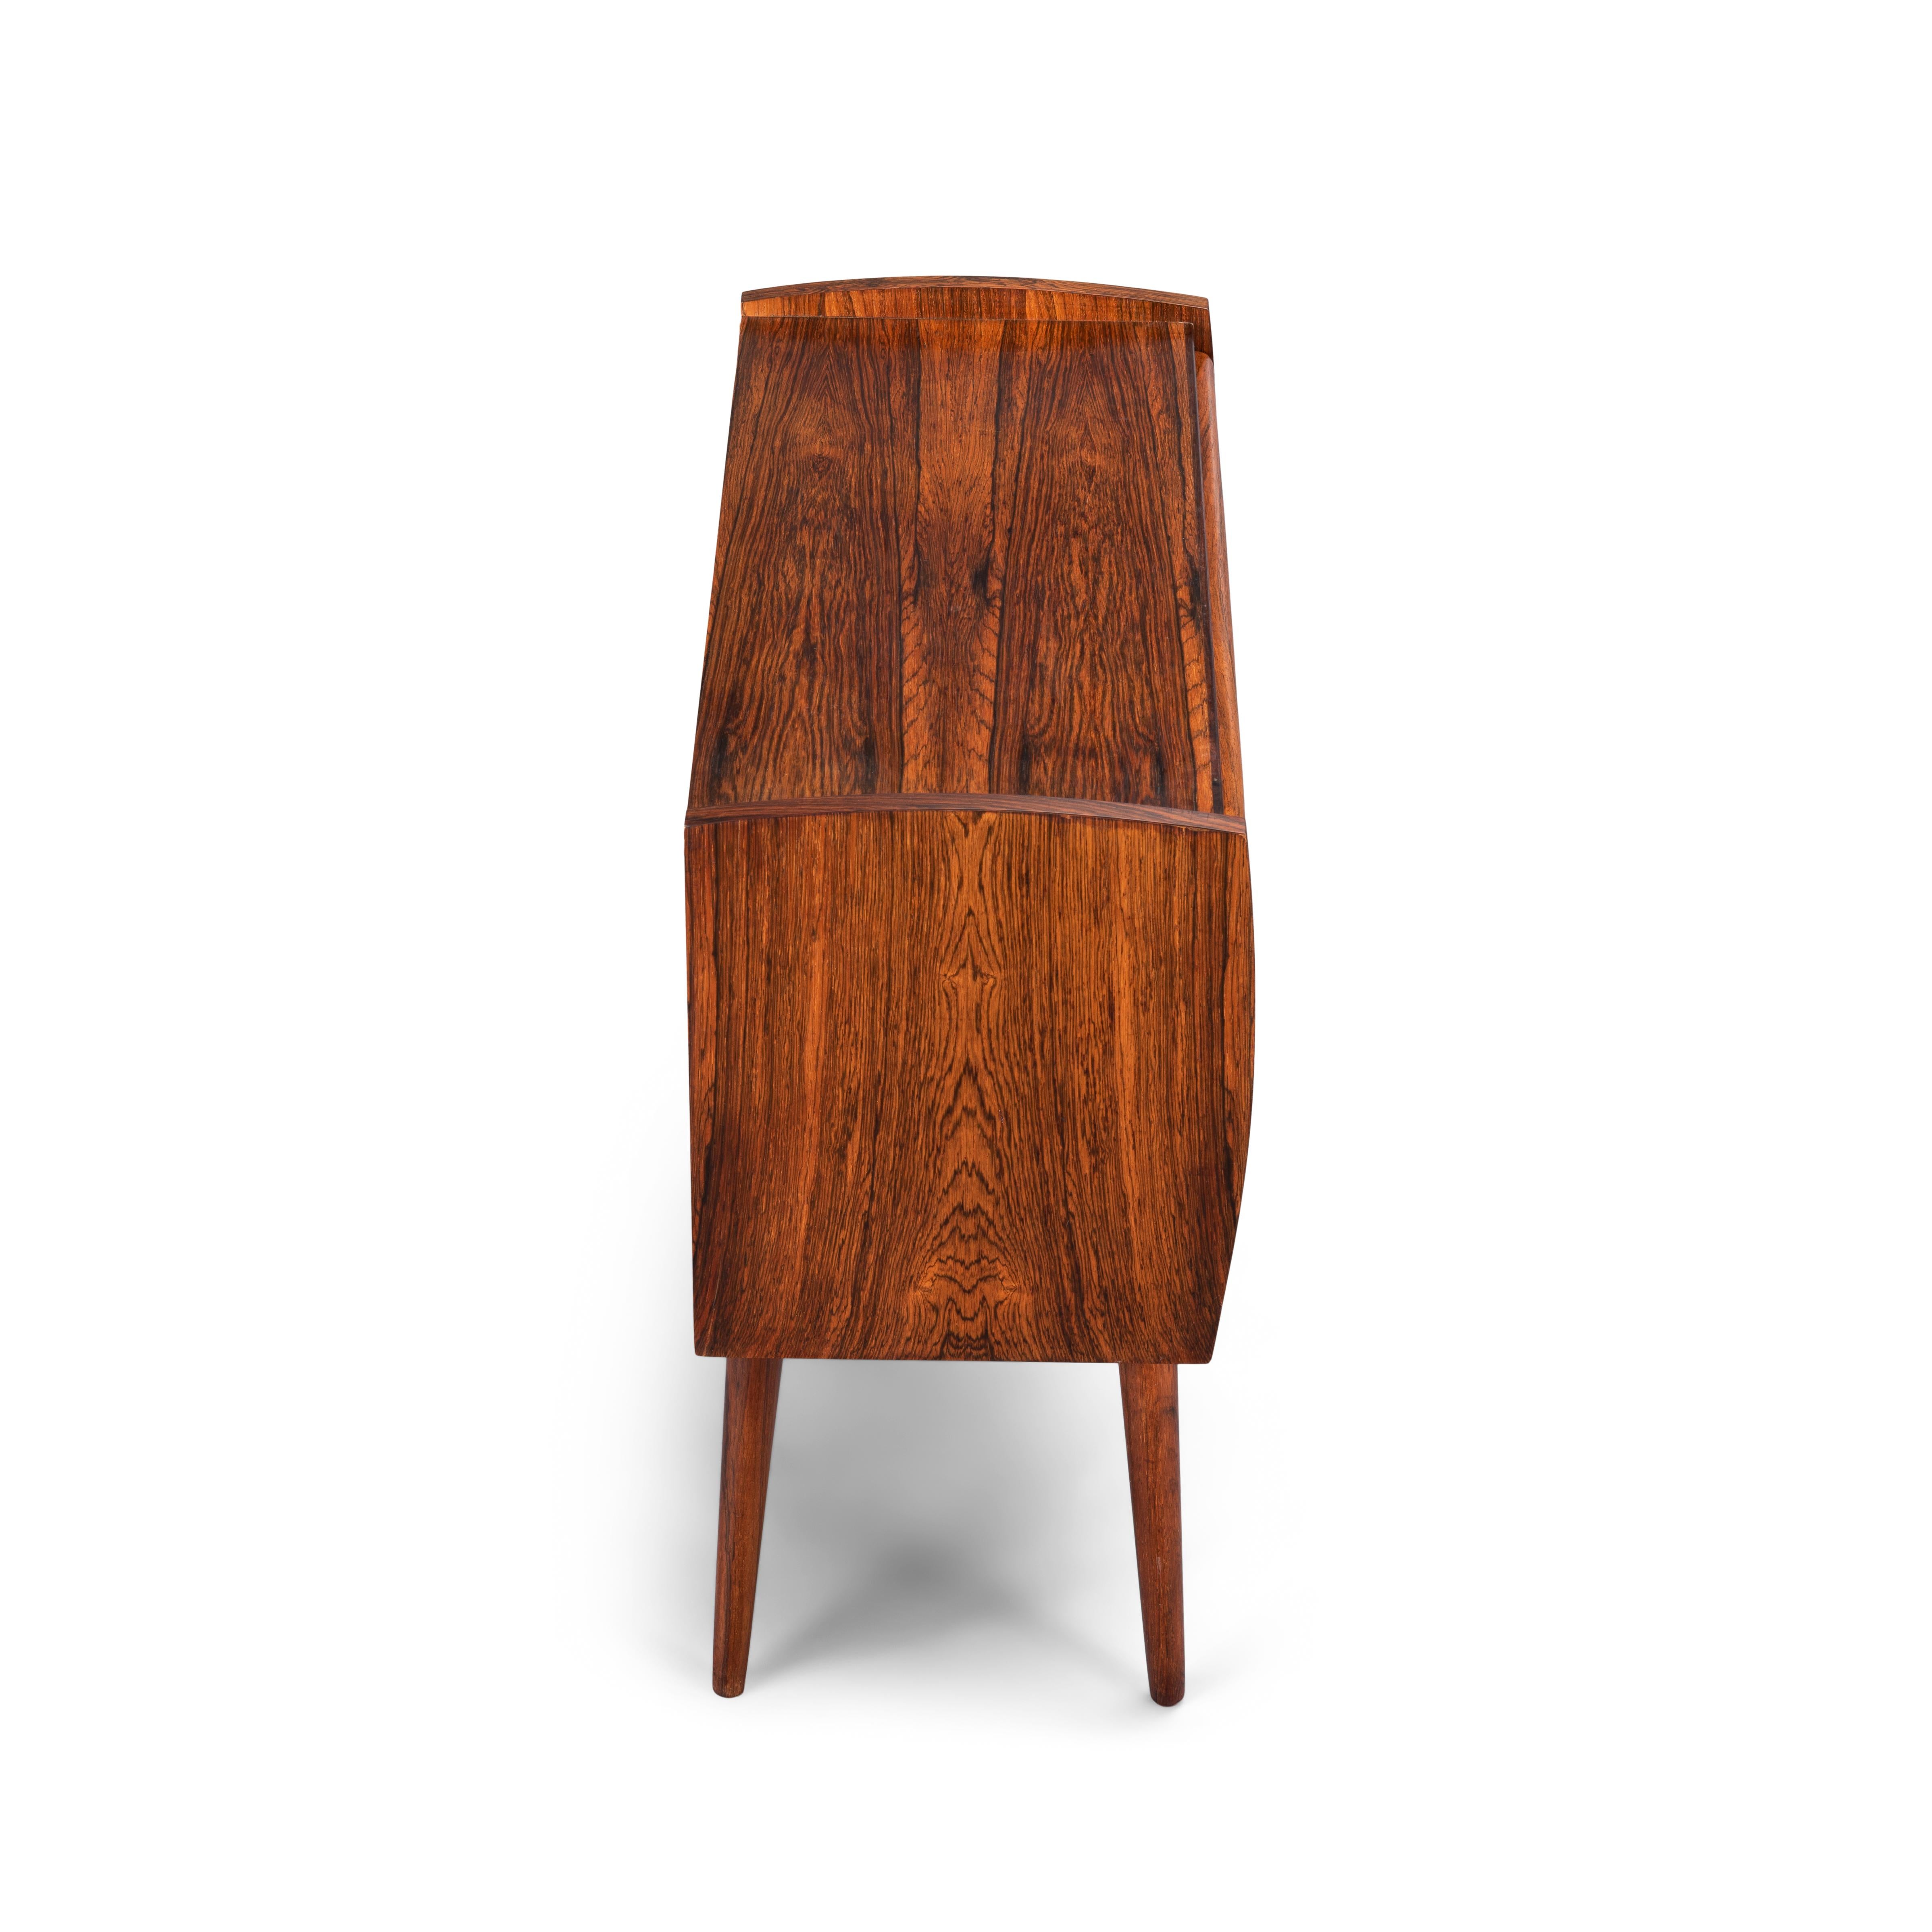 This Danish nightstand in gorgeous hardwood vineer was made late 1960s and looks very charming on its tall solid hardwood legs. Three drawers with a solid wooden grip attached onto the middle of each drawer makes the style of this nightstand